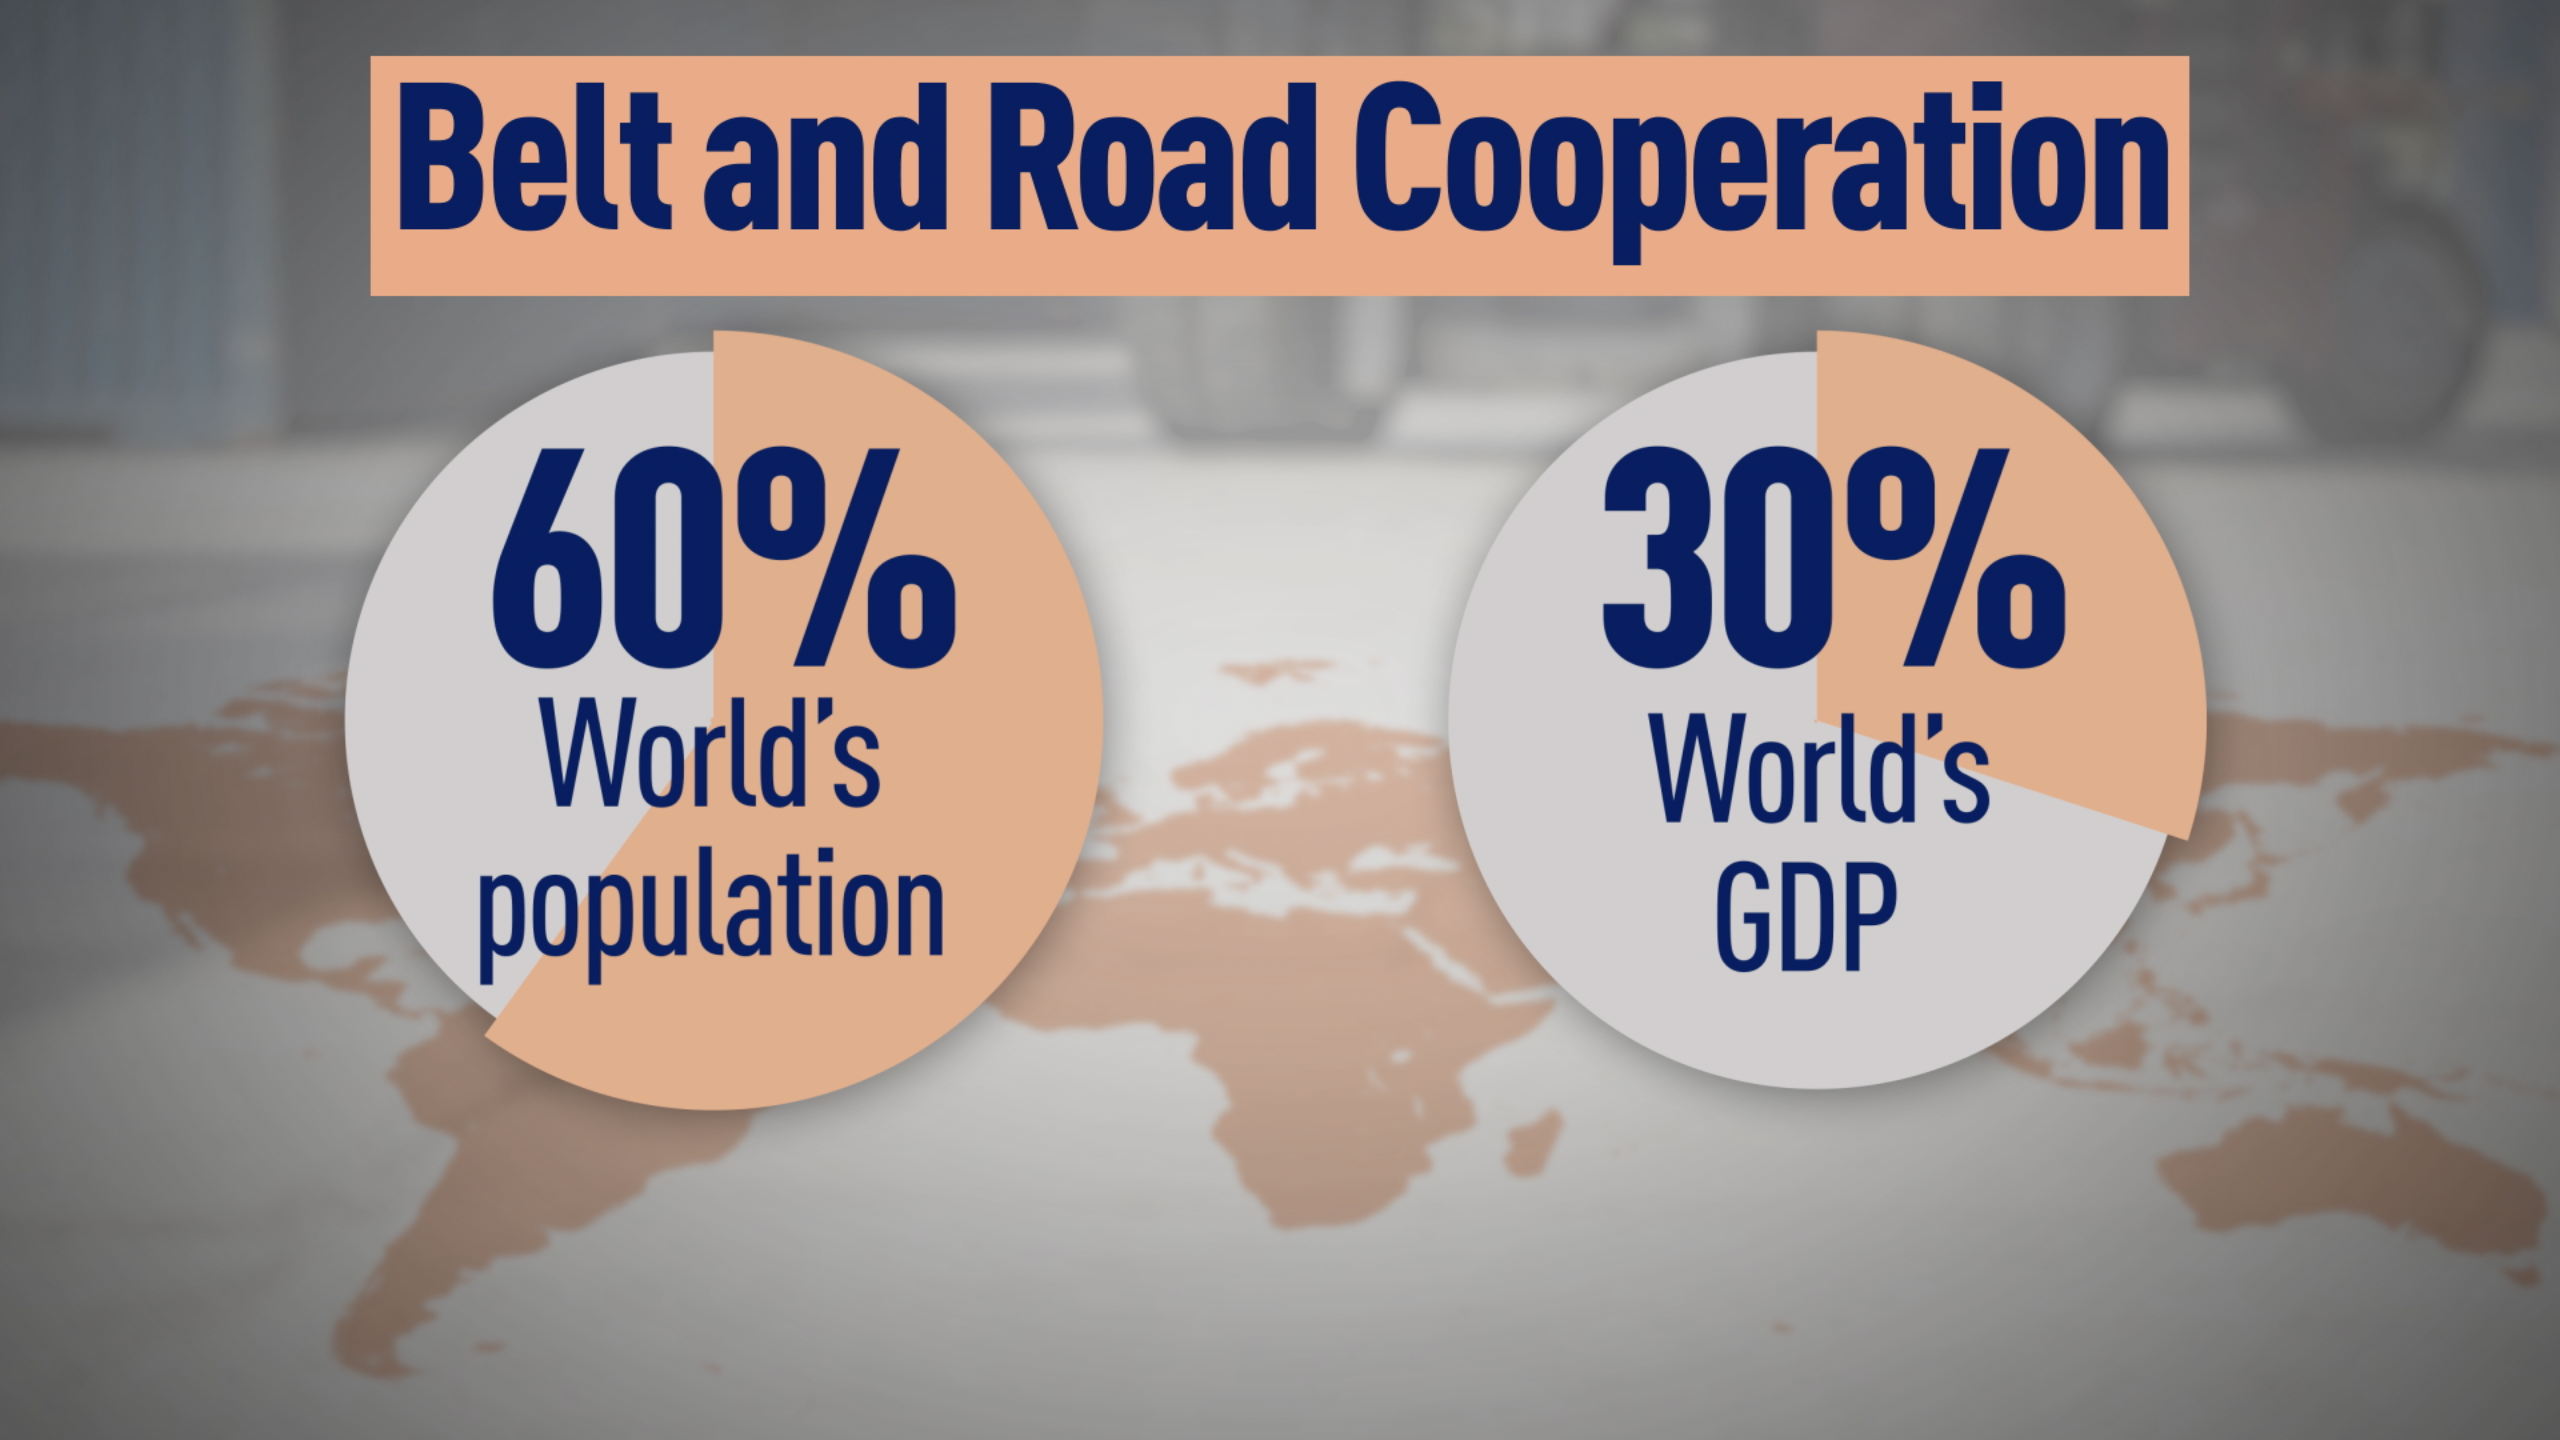 Cooperation under the Belt and Road Initiative involves more than 60 percent of the world's population and nearly a third of the world's GDP. /CGTN